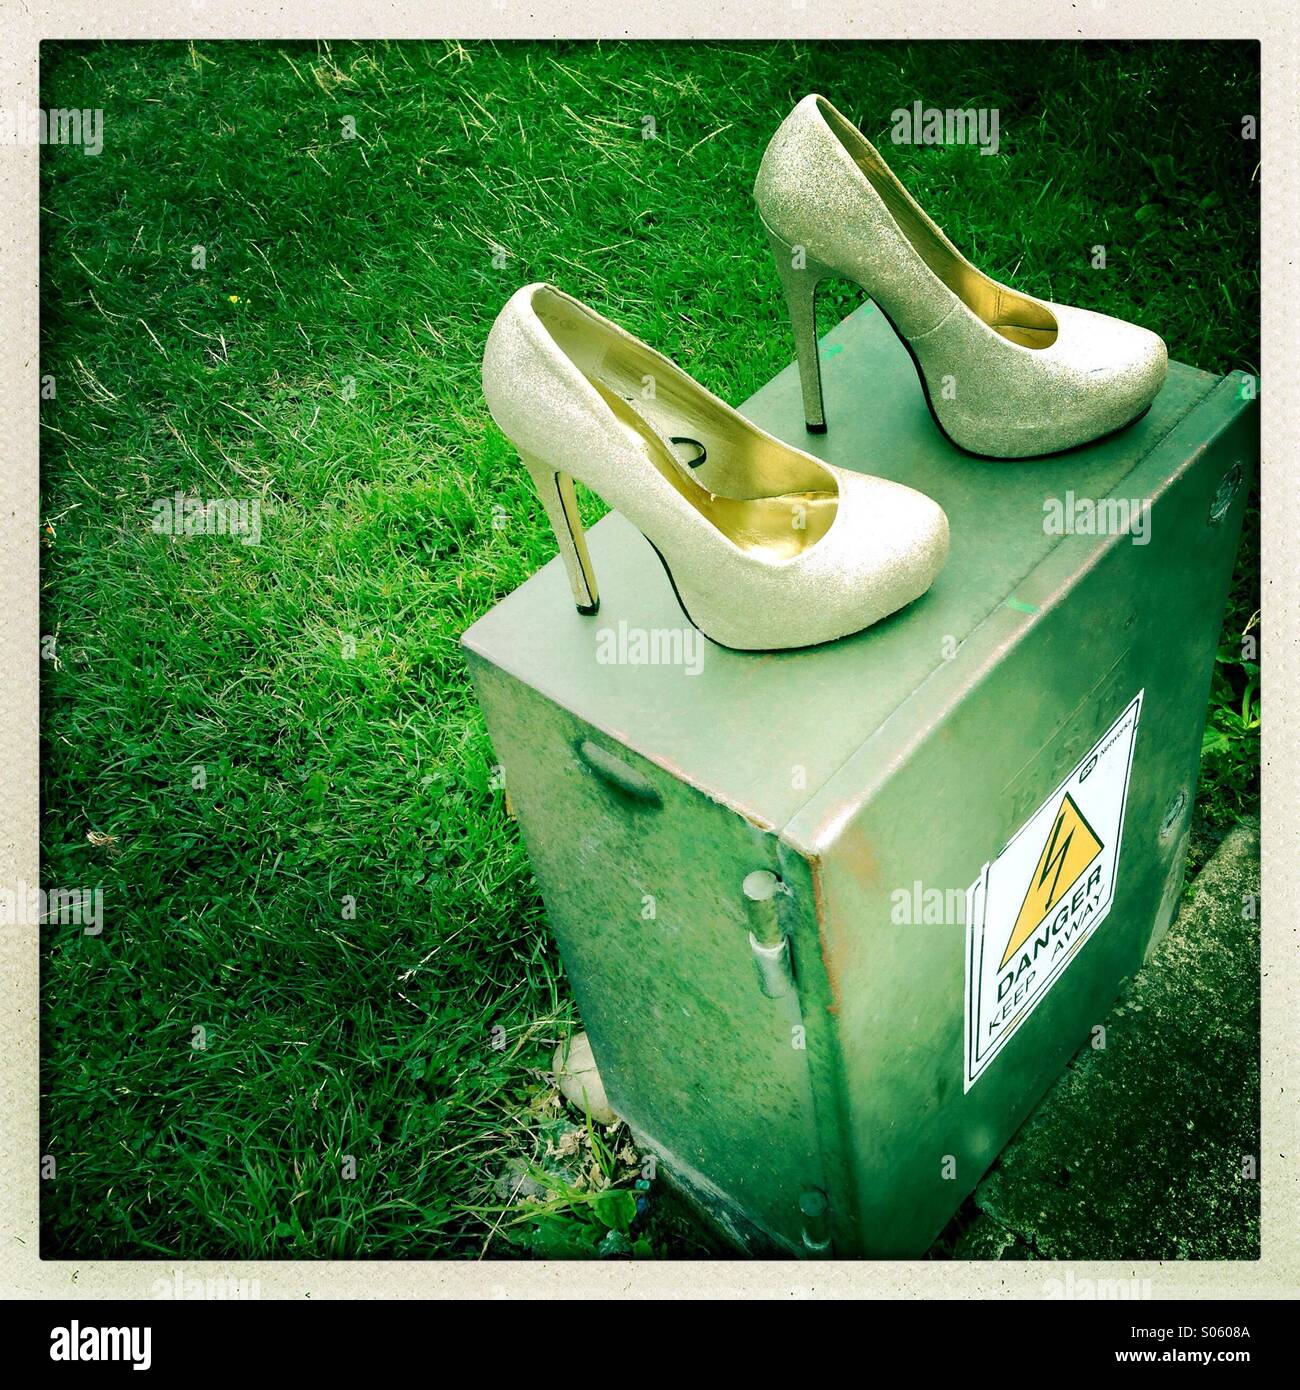 Abandoned party shoes Stock Photo